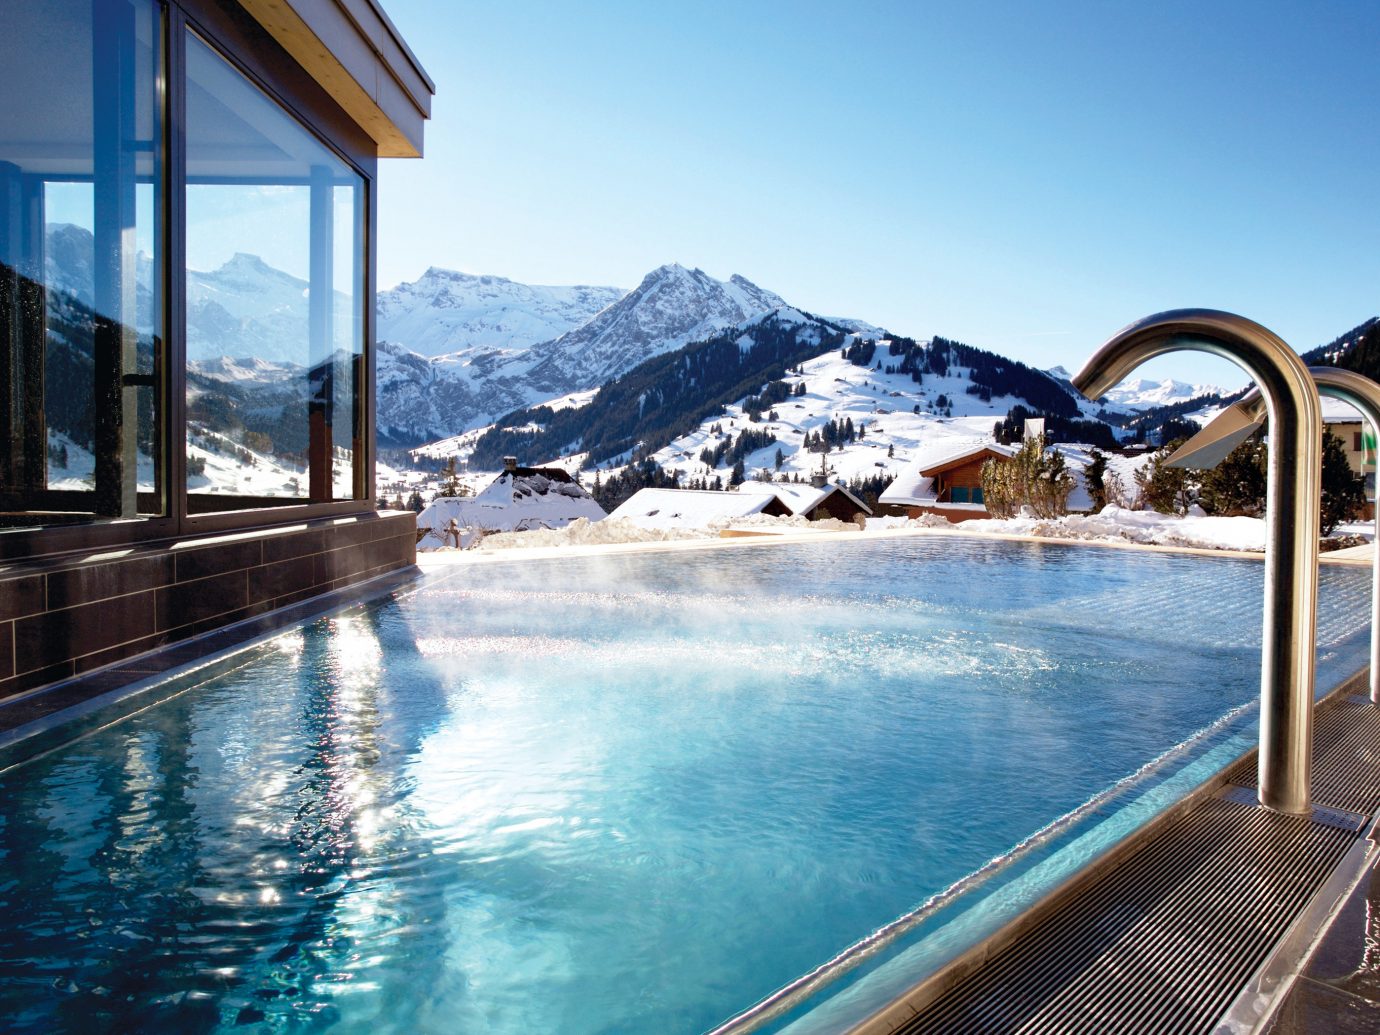 Infinity Pool At The Cabrian Hotel In Switzerland